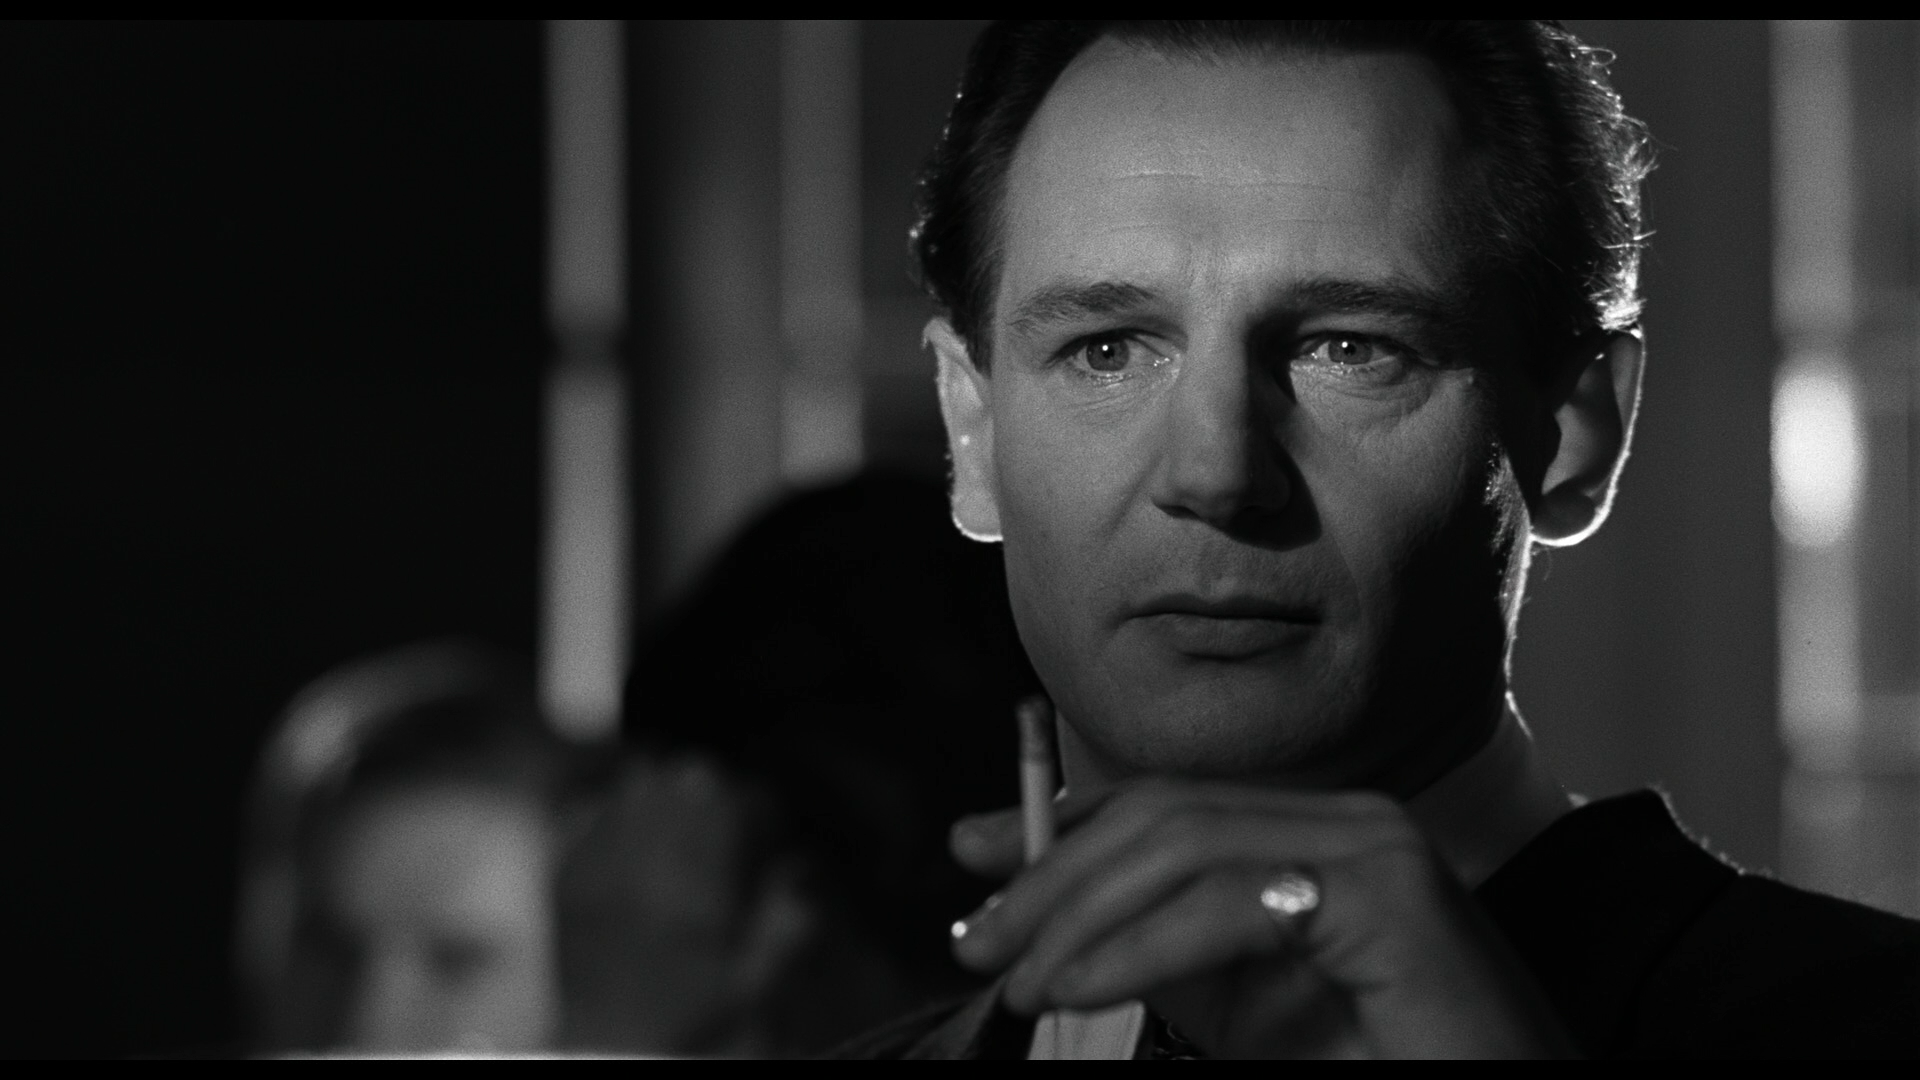 Images of Schindler's List | 1920x1080